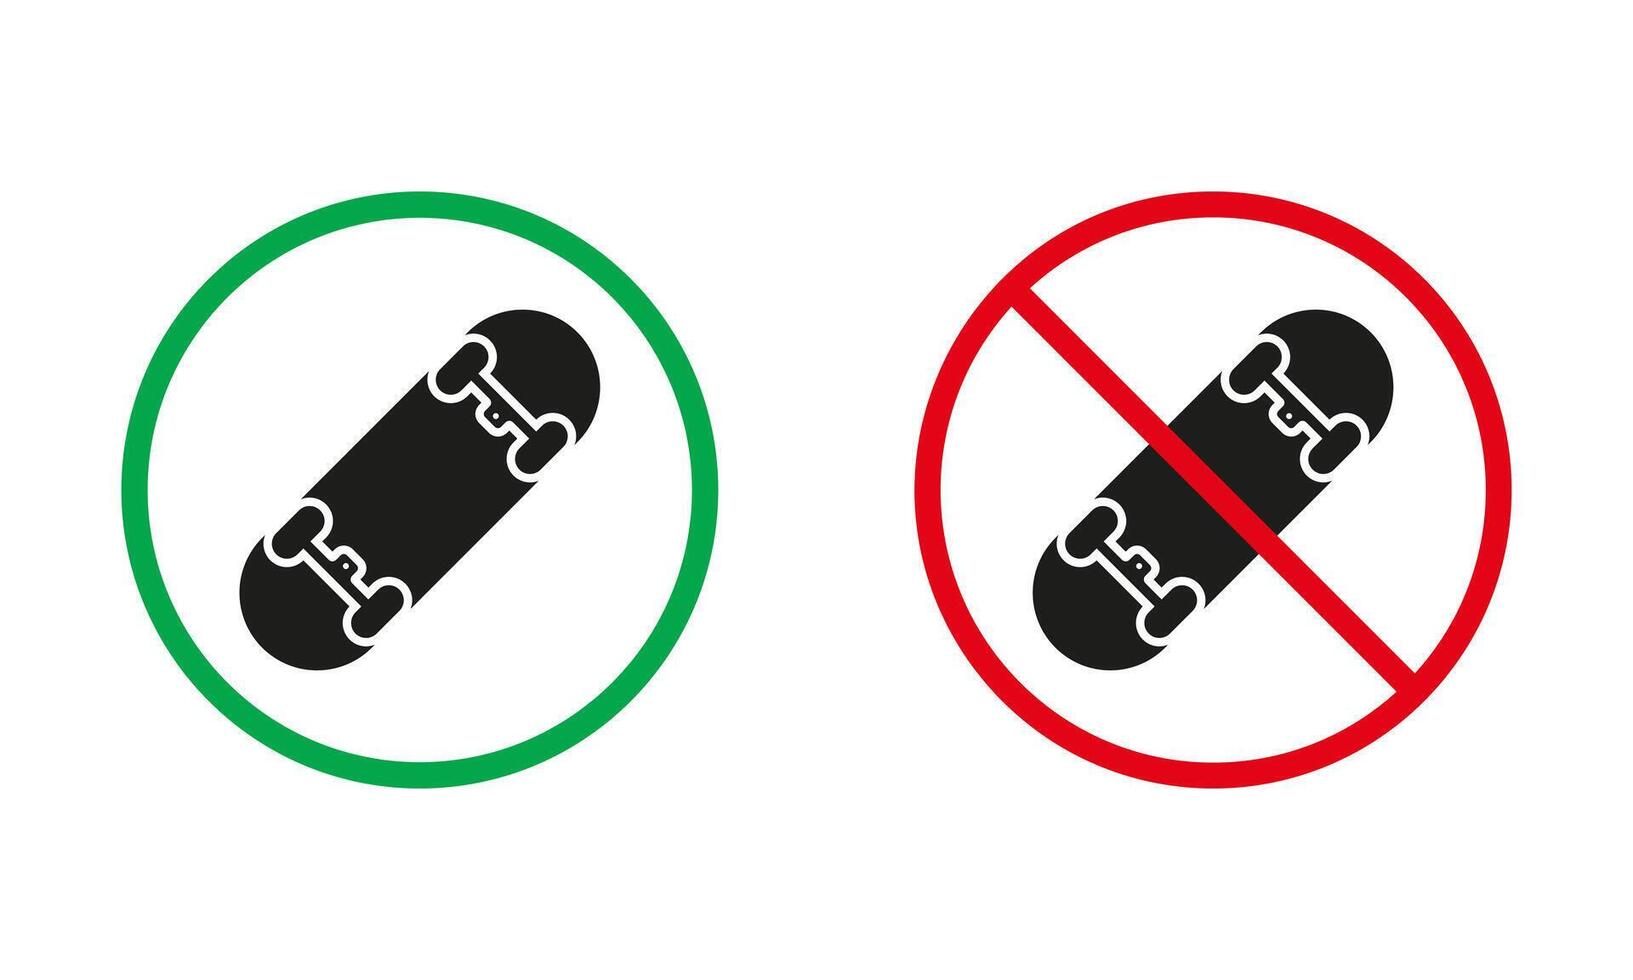 Skateboarding Warning Sign Set. Skate Board Allowed and Prohibit Silhouette Icons. Entry with Eco City Transport Red and Green Circle Symbol. Isolated Vector Illustration